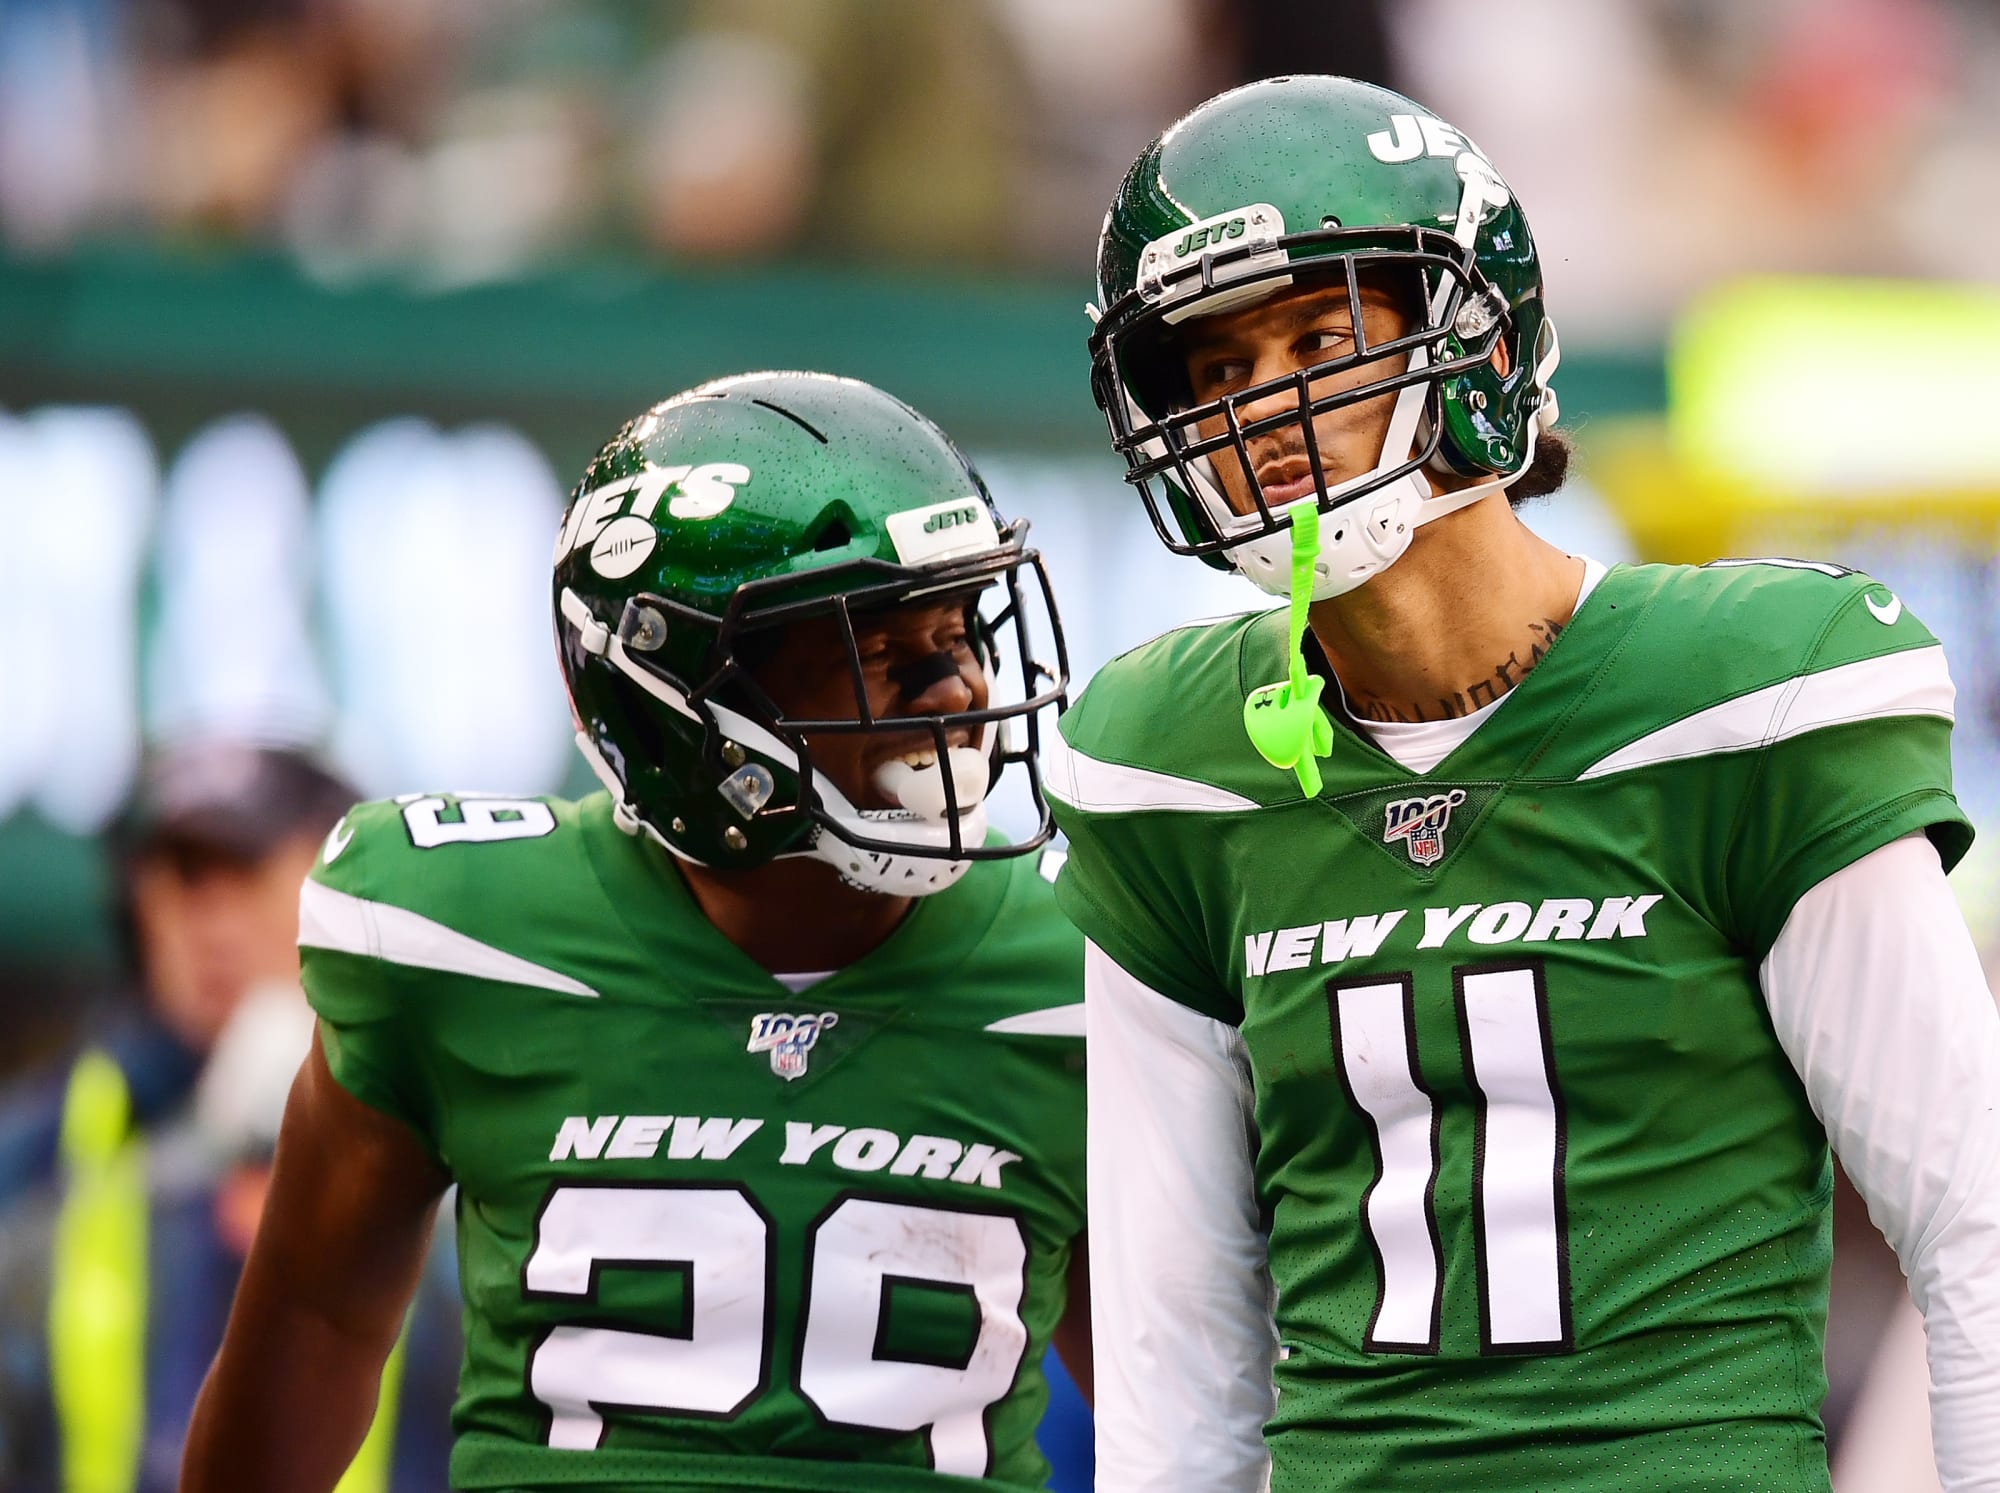 New York Jets Two key defensive players expected to return this week